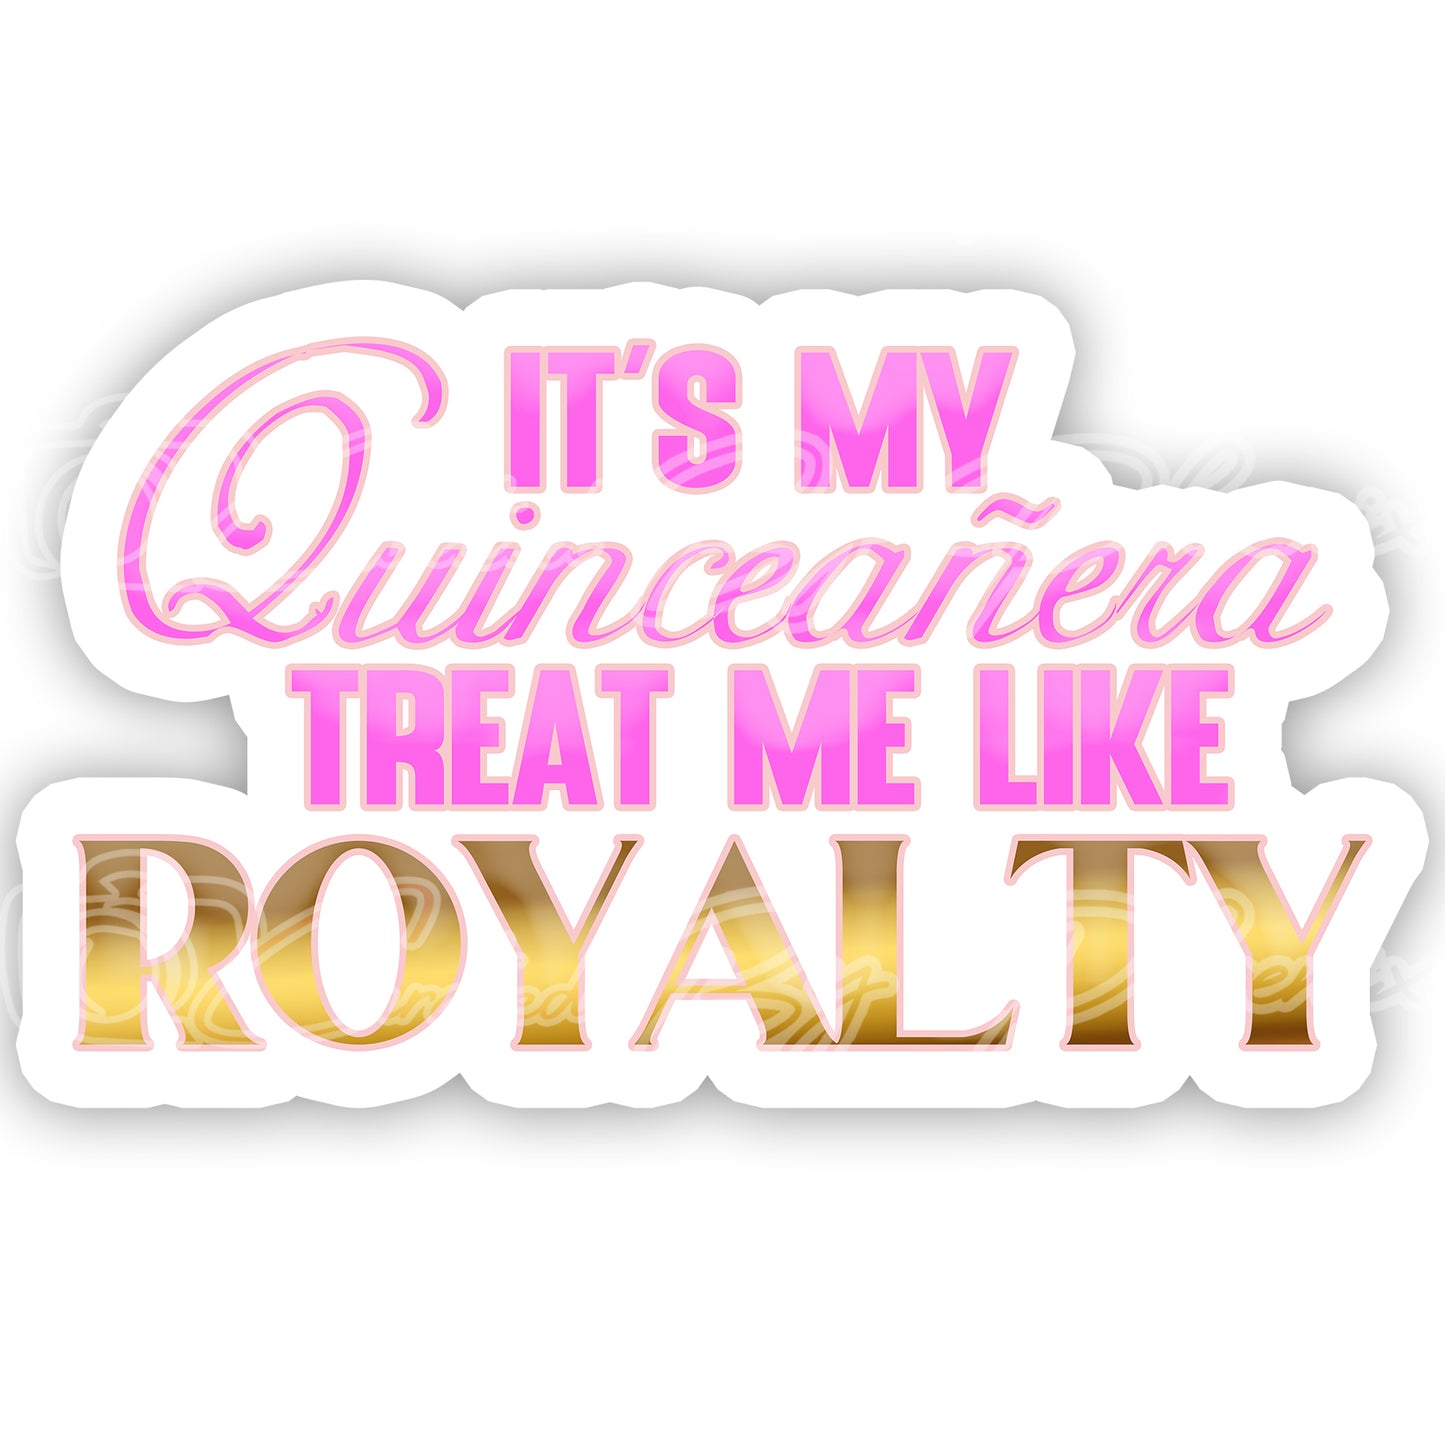 It's my Quinceanera treat me like royalty  Prop - It's my Quinceanera treat me like royalty  Photo booth prop sign - Photo booth props-custom props -prop signs-props-Curated by Phoenix